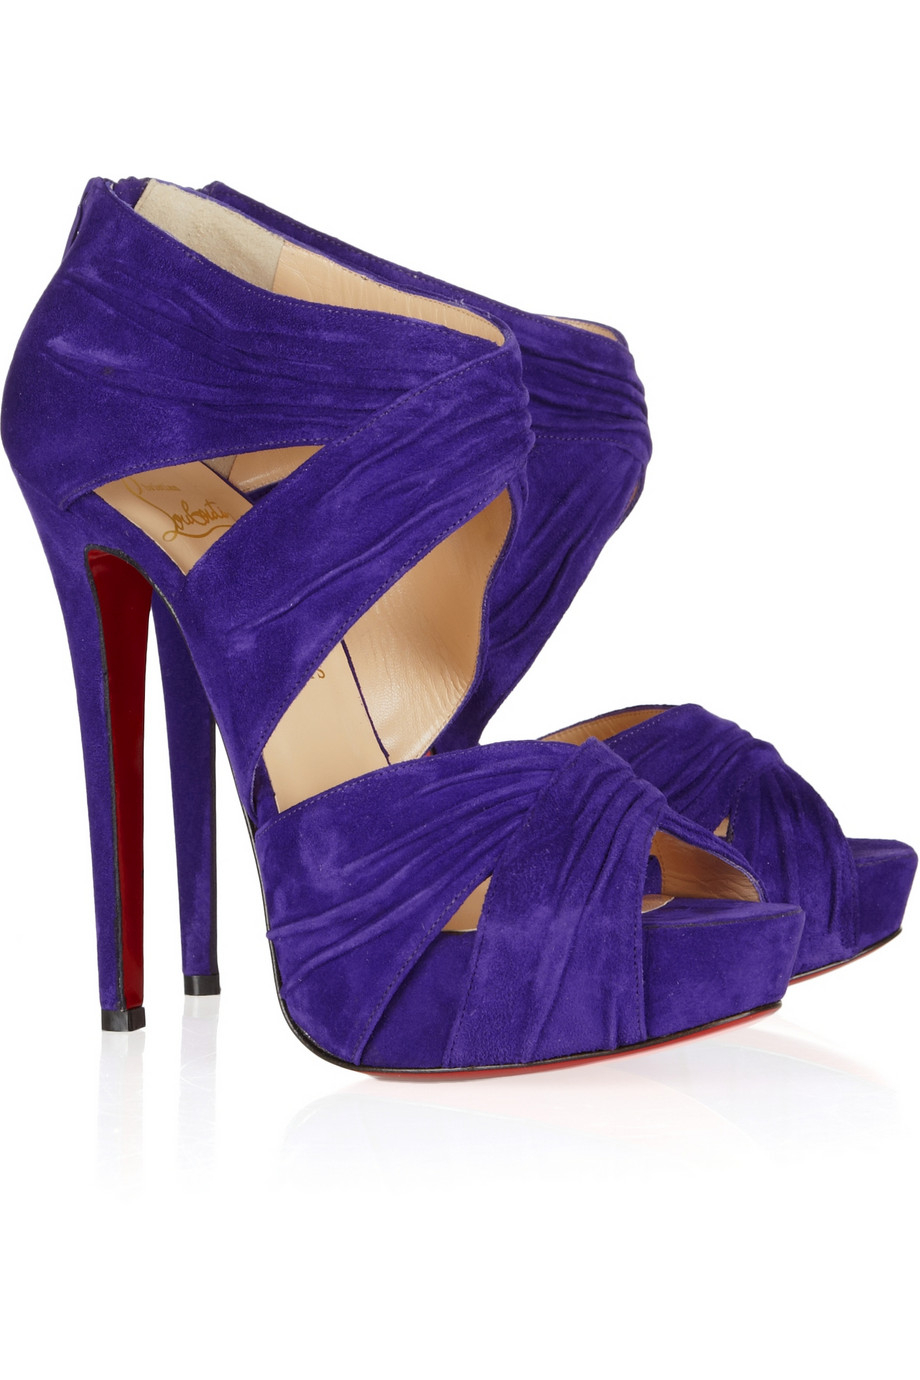 servitrice misundelse smog Christian Louboutin Bandra 140 Ruched Suede Sandals in Violet (Purple) -  Lyst